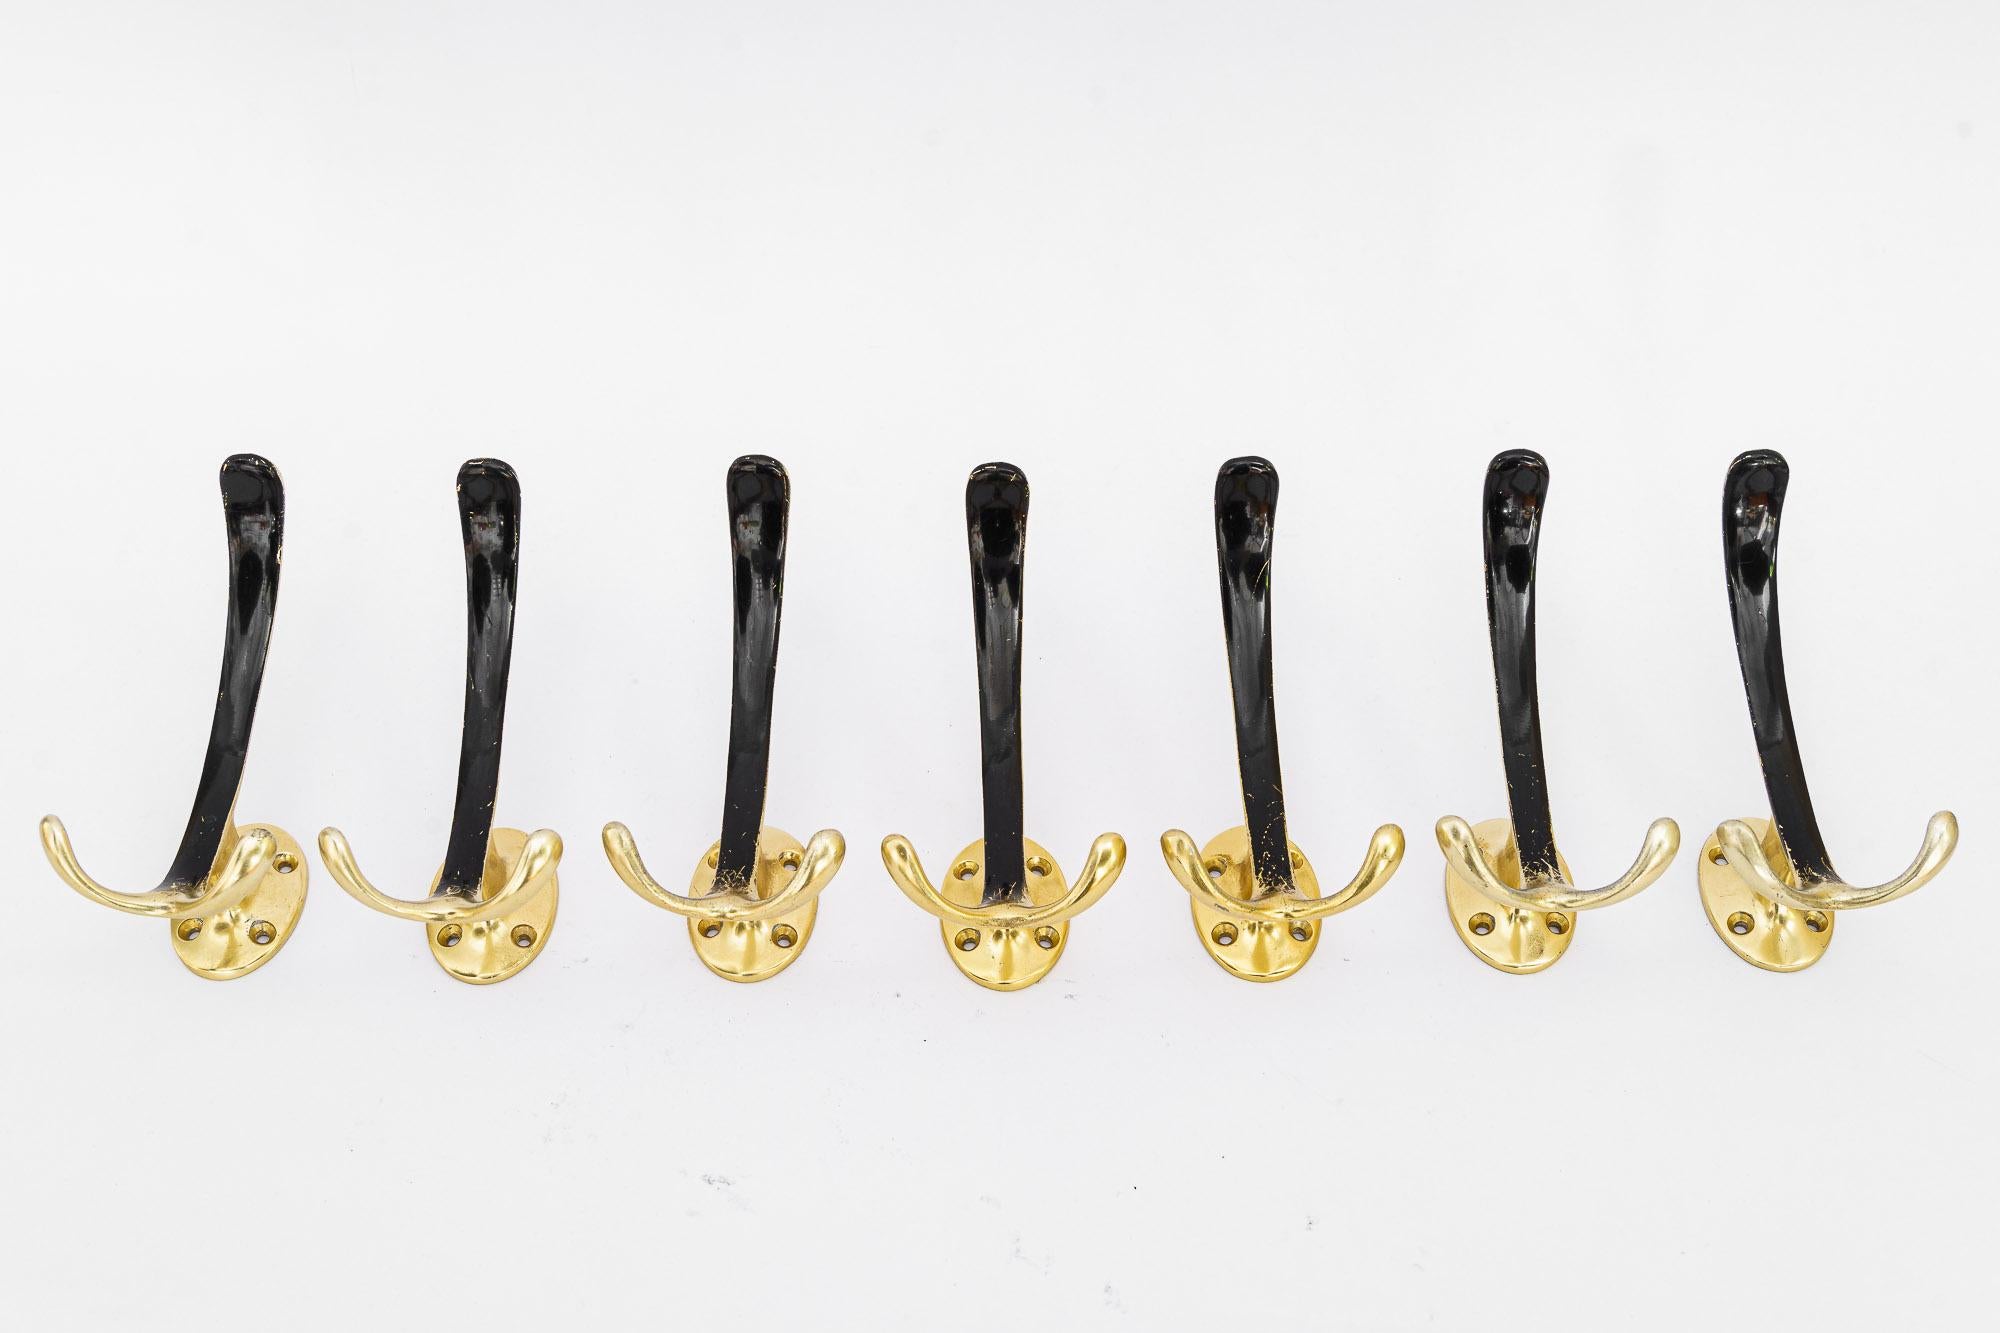 7 aluminum wall hooks black and gold lacquered vienna around 1960s
Original condition.